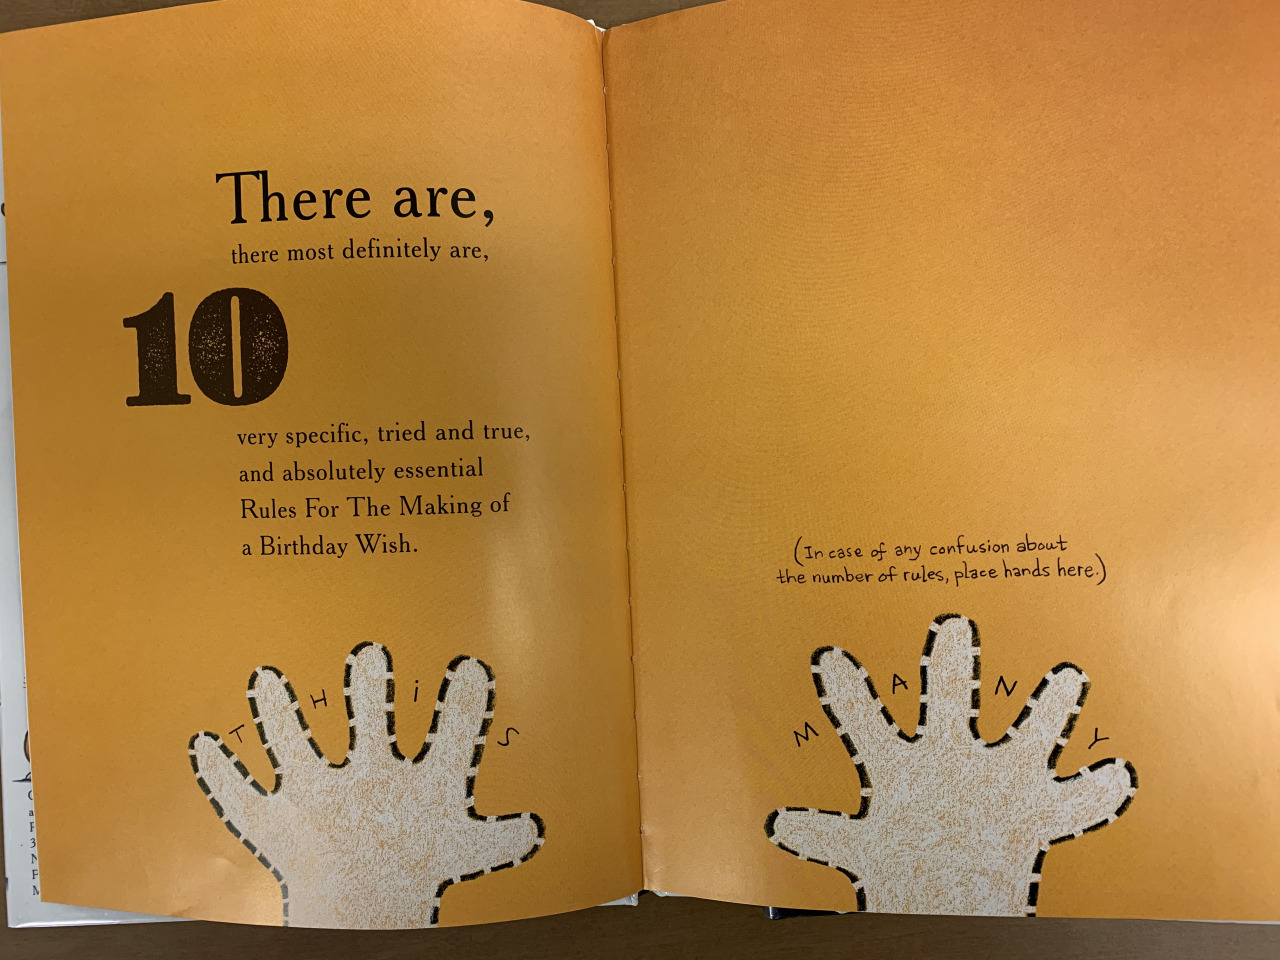 Interior pages of the book. There is a dotted line outline of two small hands at the bottom. The text reads There are, there most definitely are, ten very specific, tired and true, and absolutely essential Rules For the Making of a Birthday Wish. In case of any confusion about the number of rules place hands here. This many.